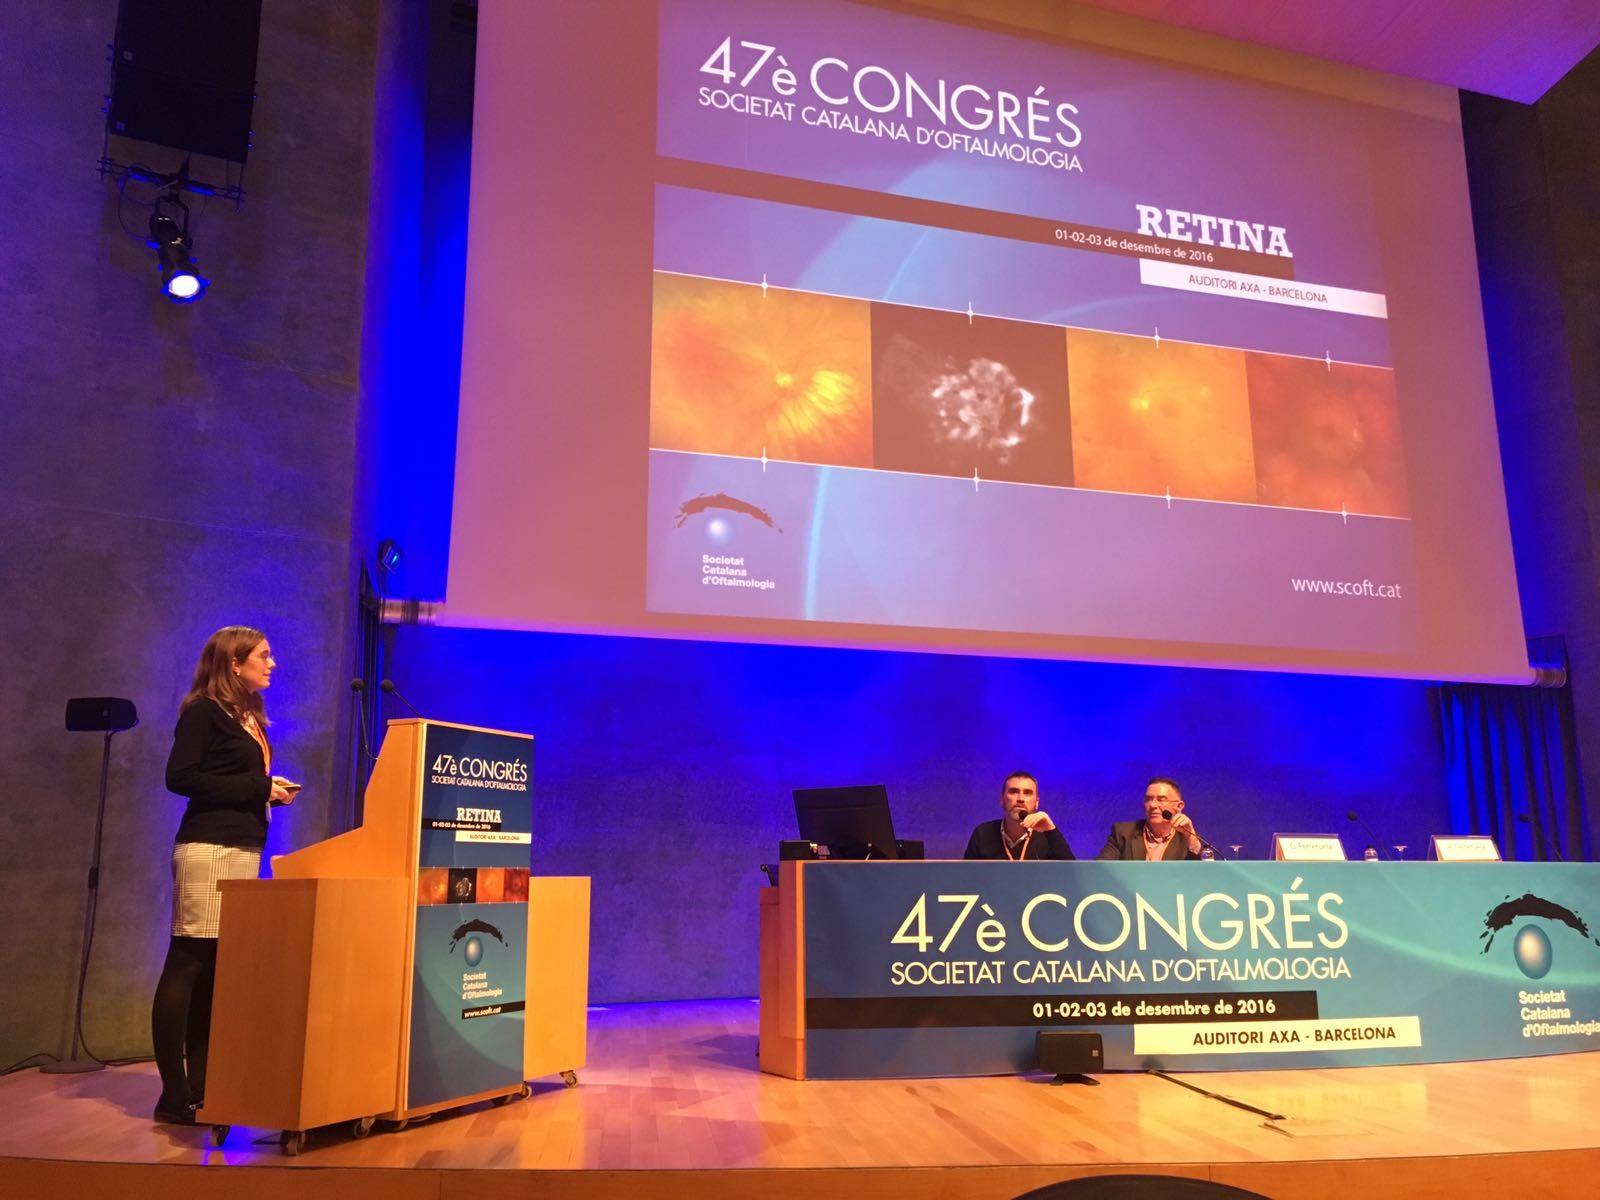 Dr. Rey receives the award for best video communication at the 47th SCOFT Congress